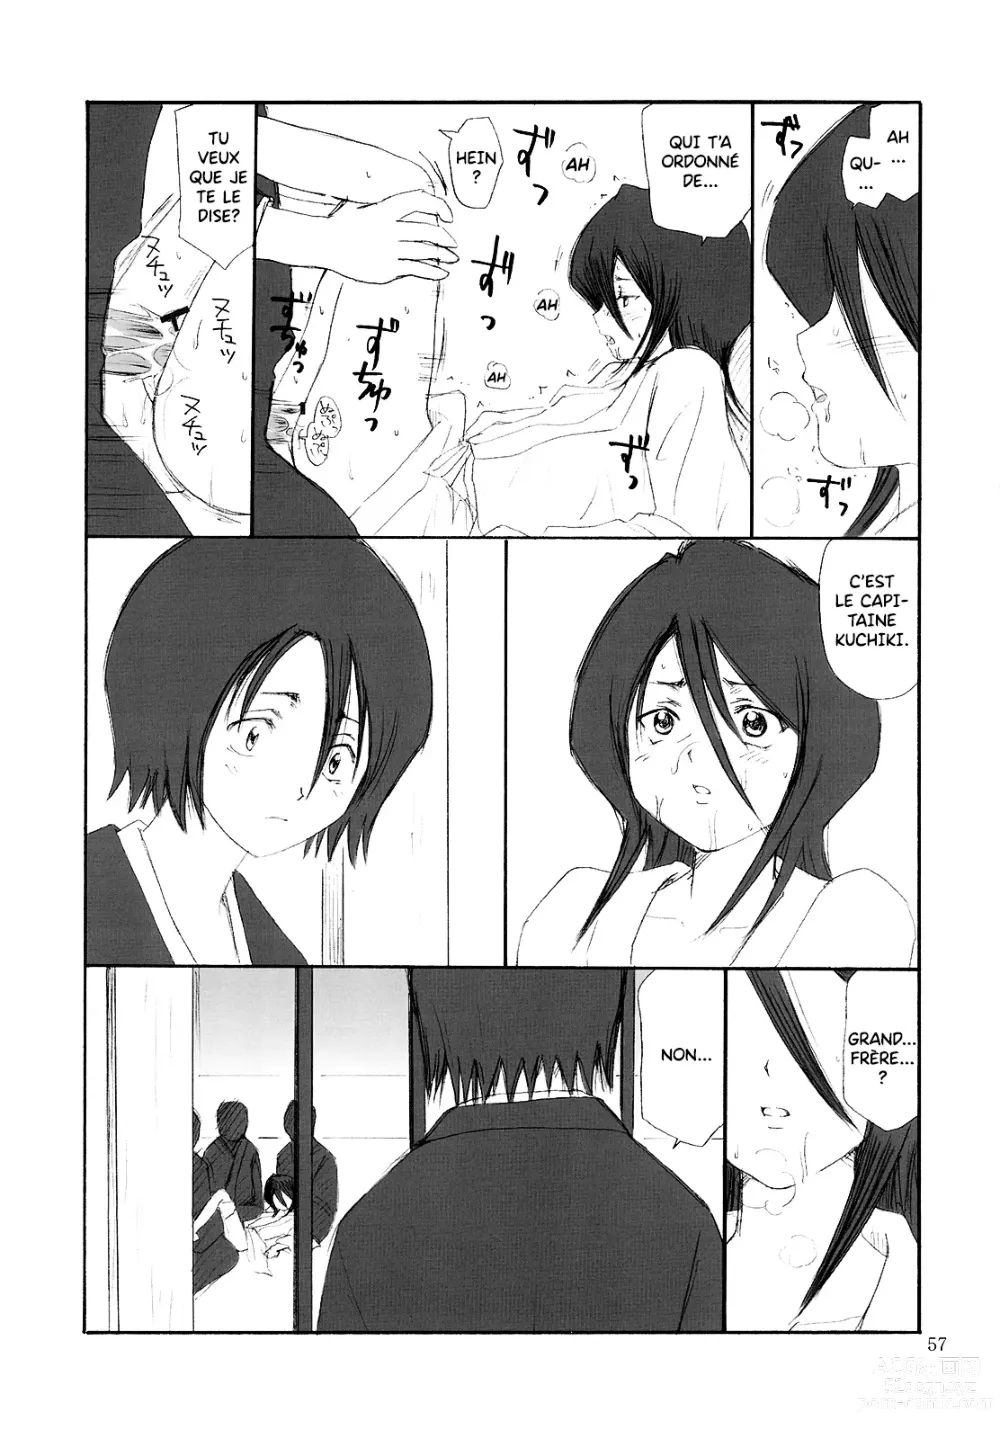 Page 57 of doujinshi OTHERSIDE Kaiteiban